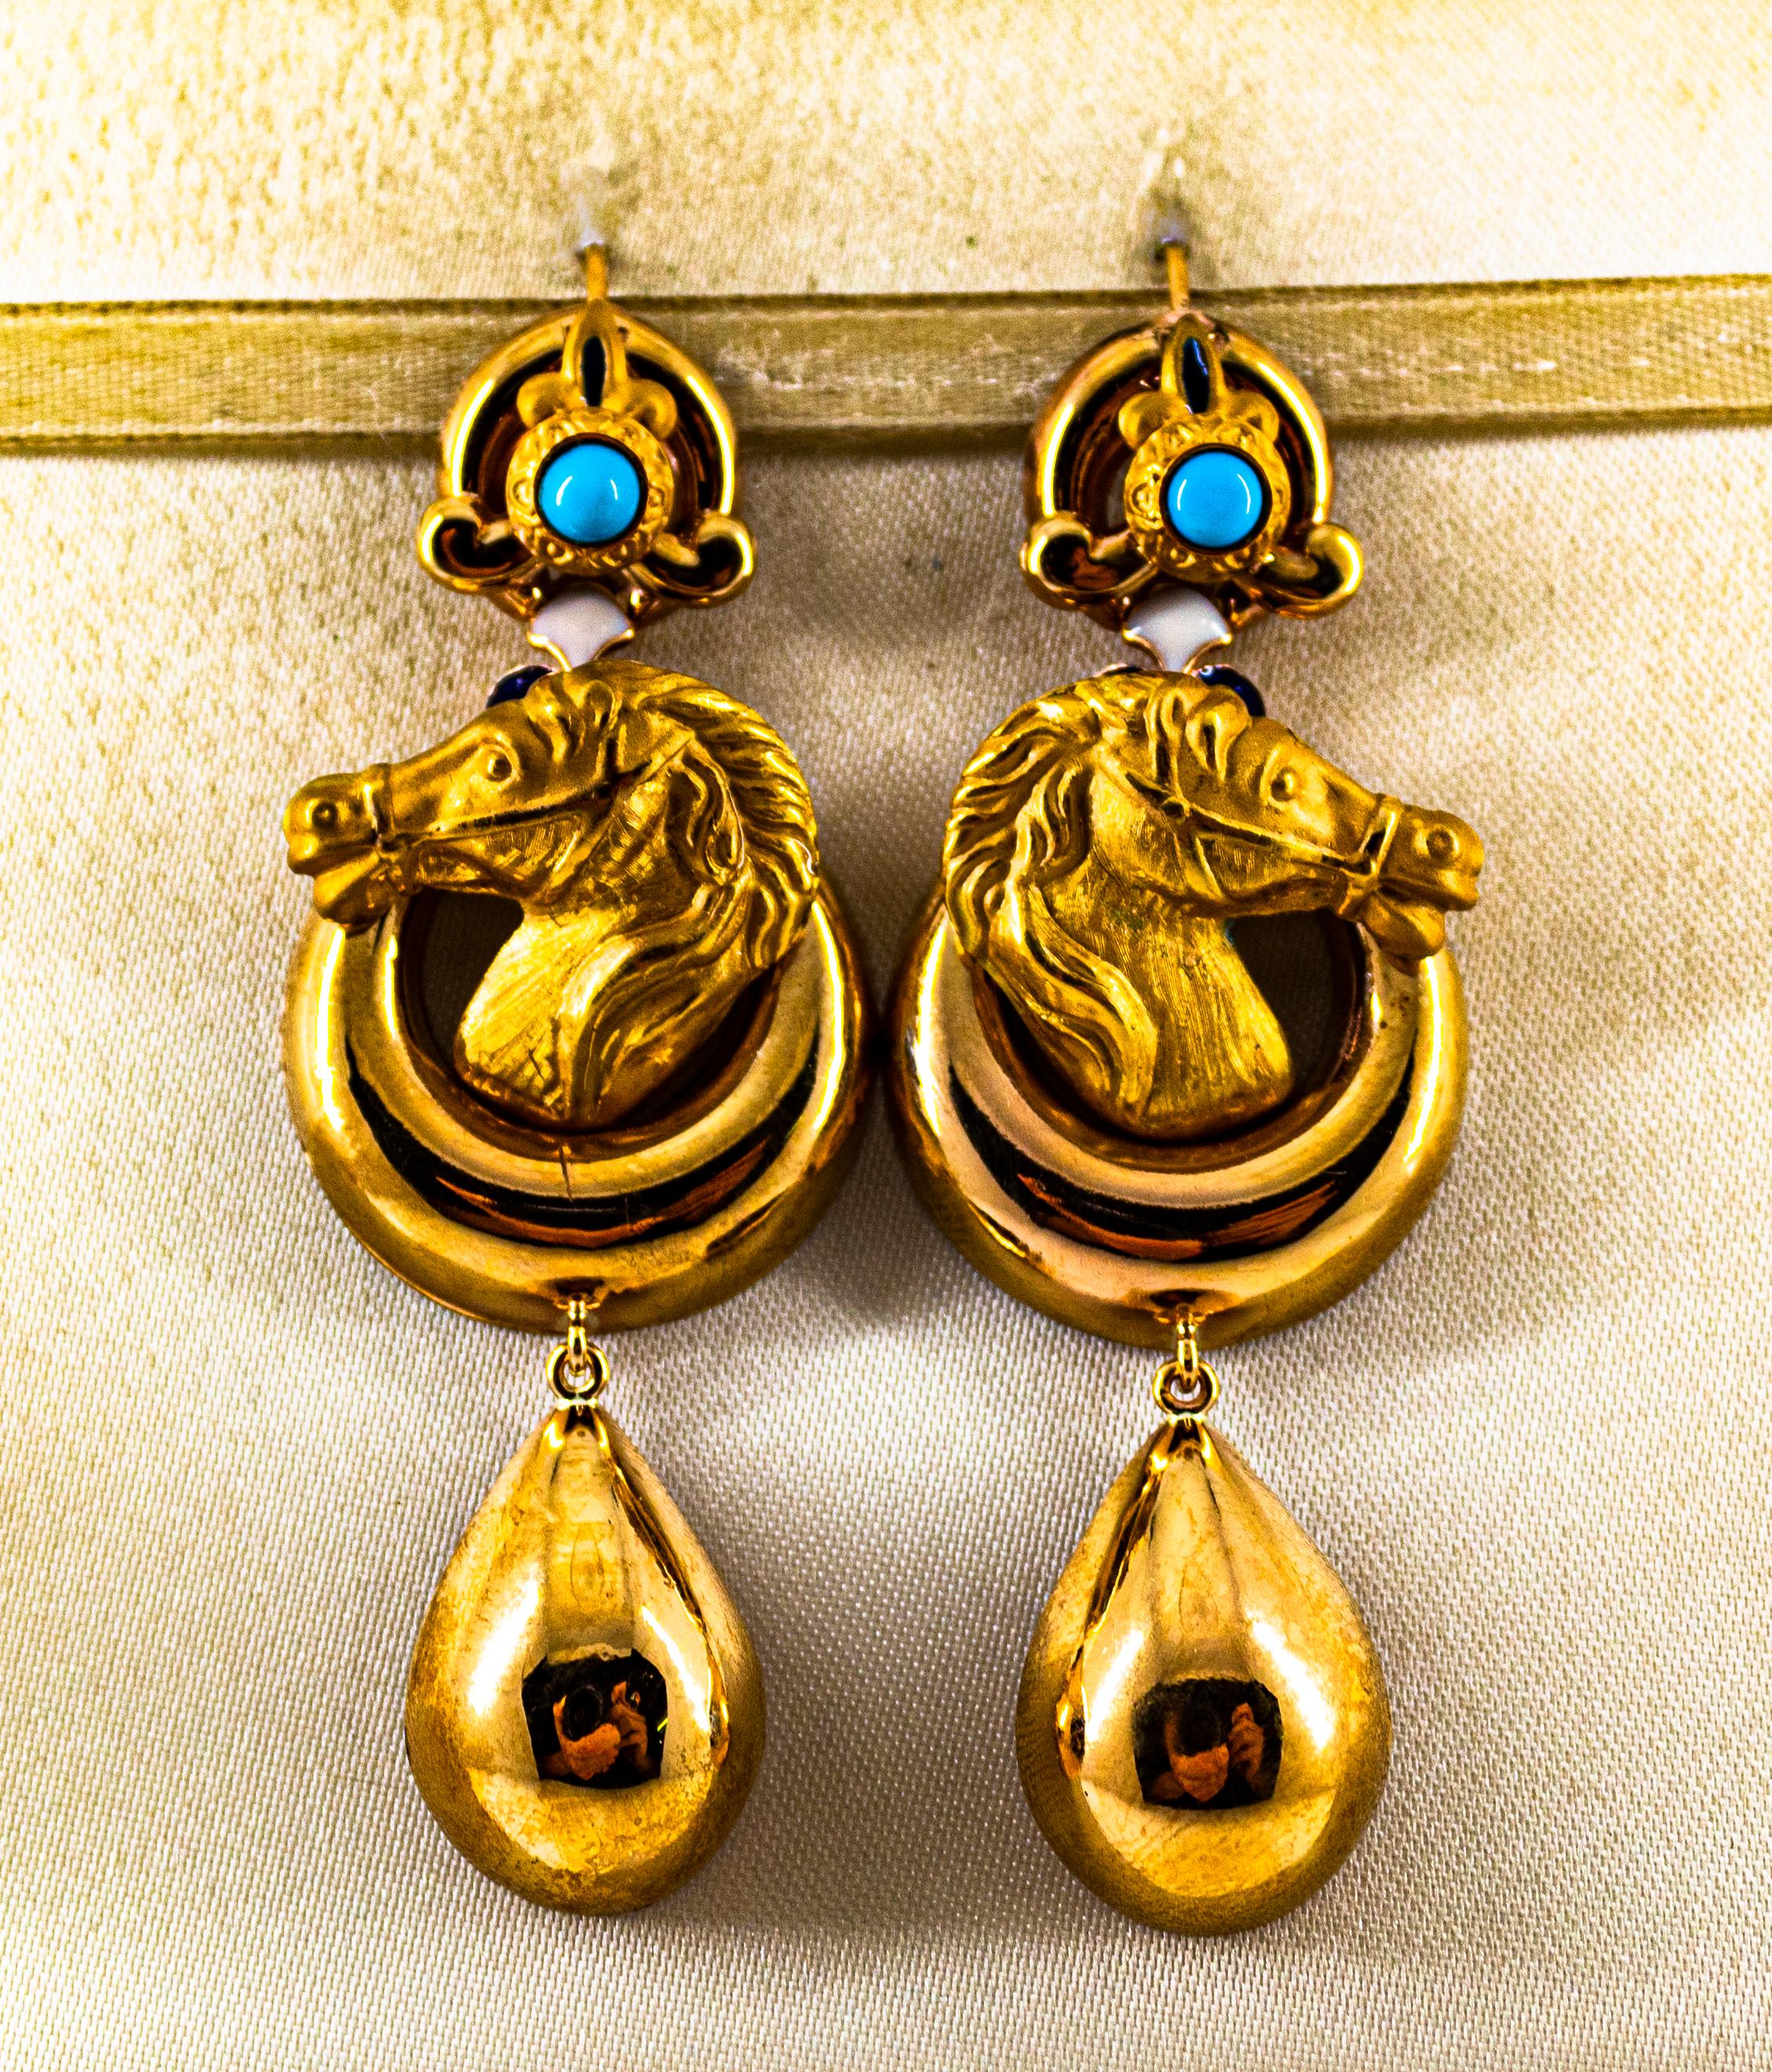 These Earrings are made of 9K Yellow Gold.
These Earrings are available also in 14K or 18K Yellow or White Gold.
These Earrings have Natural Turquoise and Enamel.
These Earrings are inspired by Art Nouveau.

All our Earrings have pins for pierced